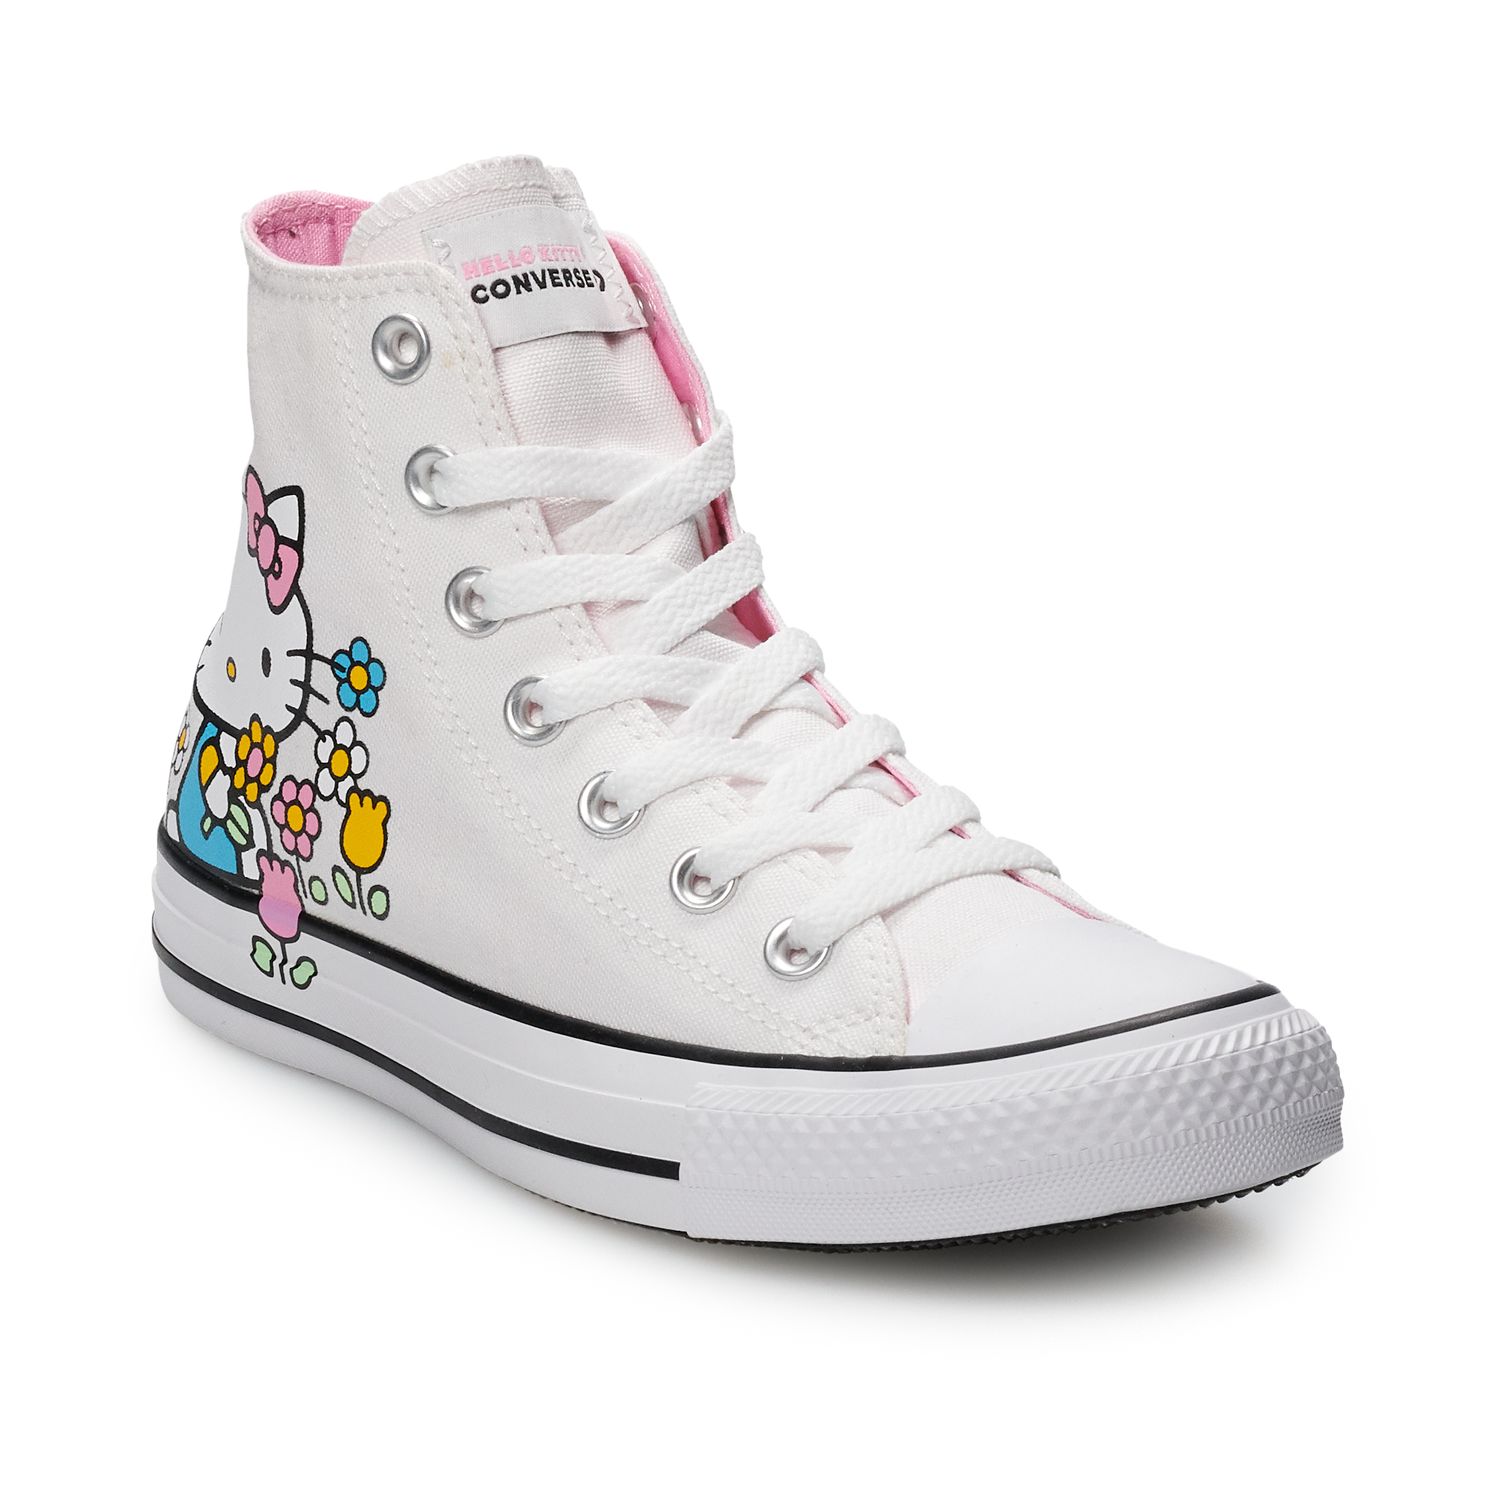 Women's Converse Hello Kitty® Chuck Taylor All Star High Top Shoes